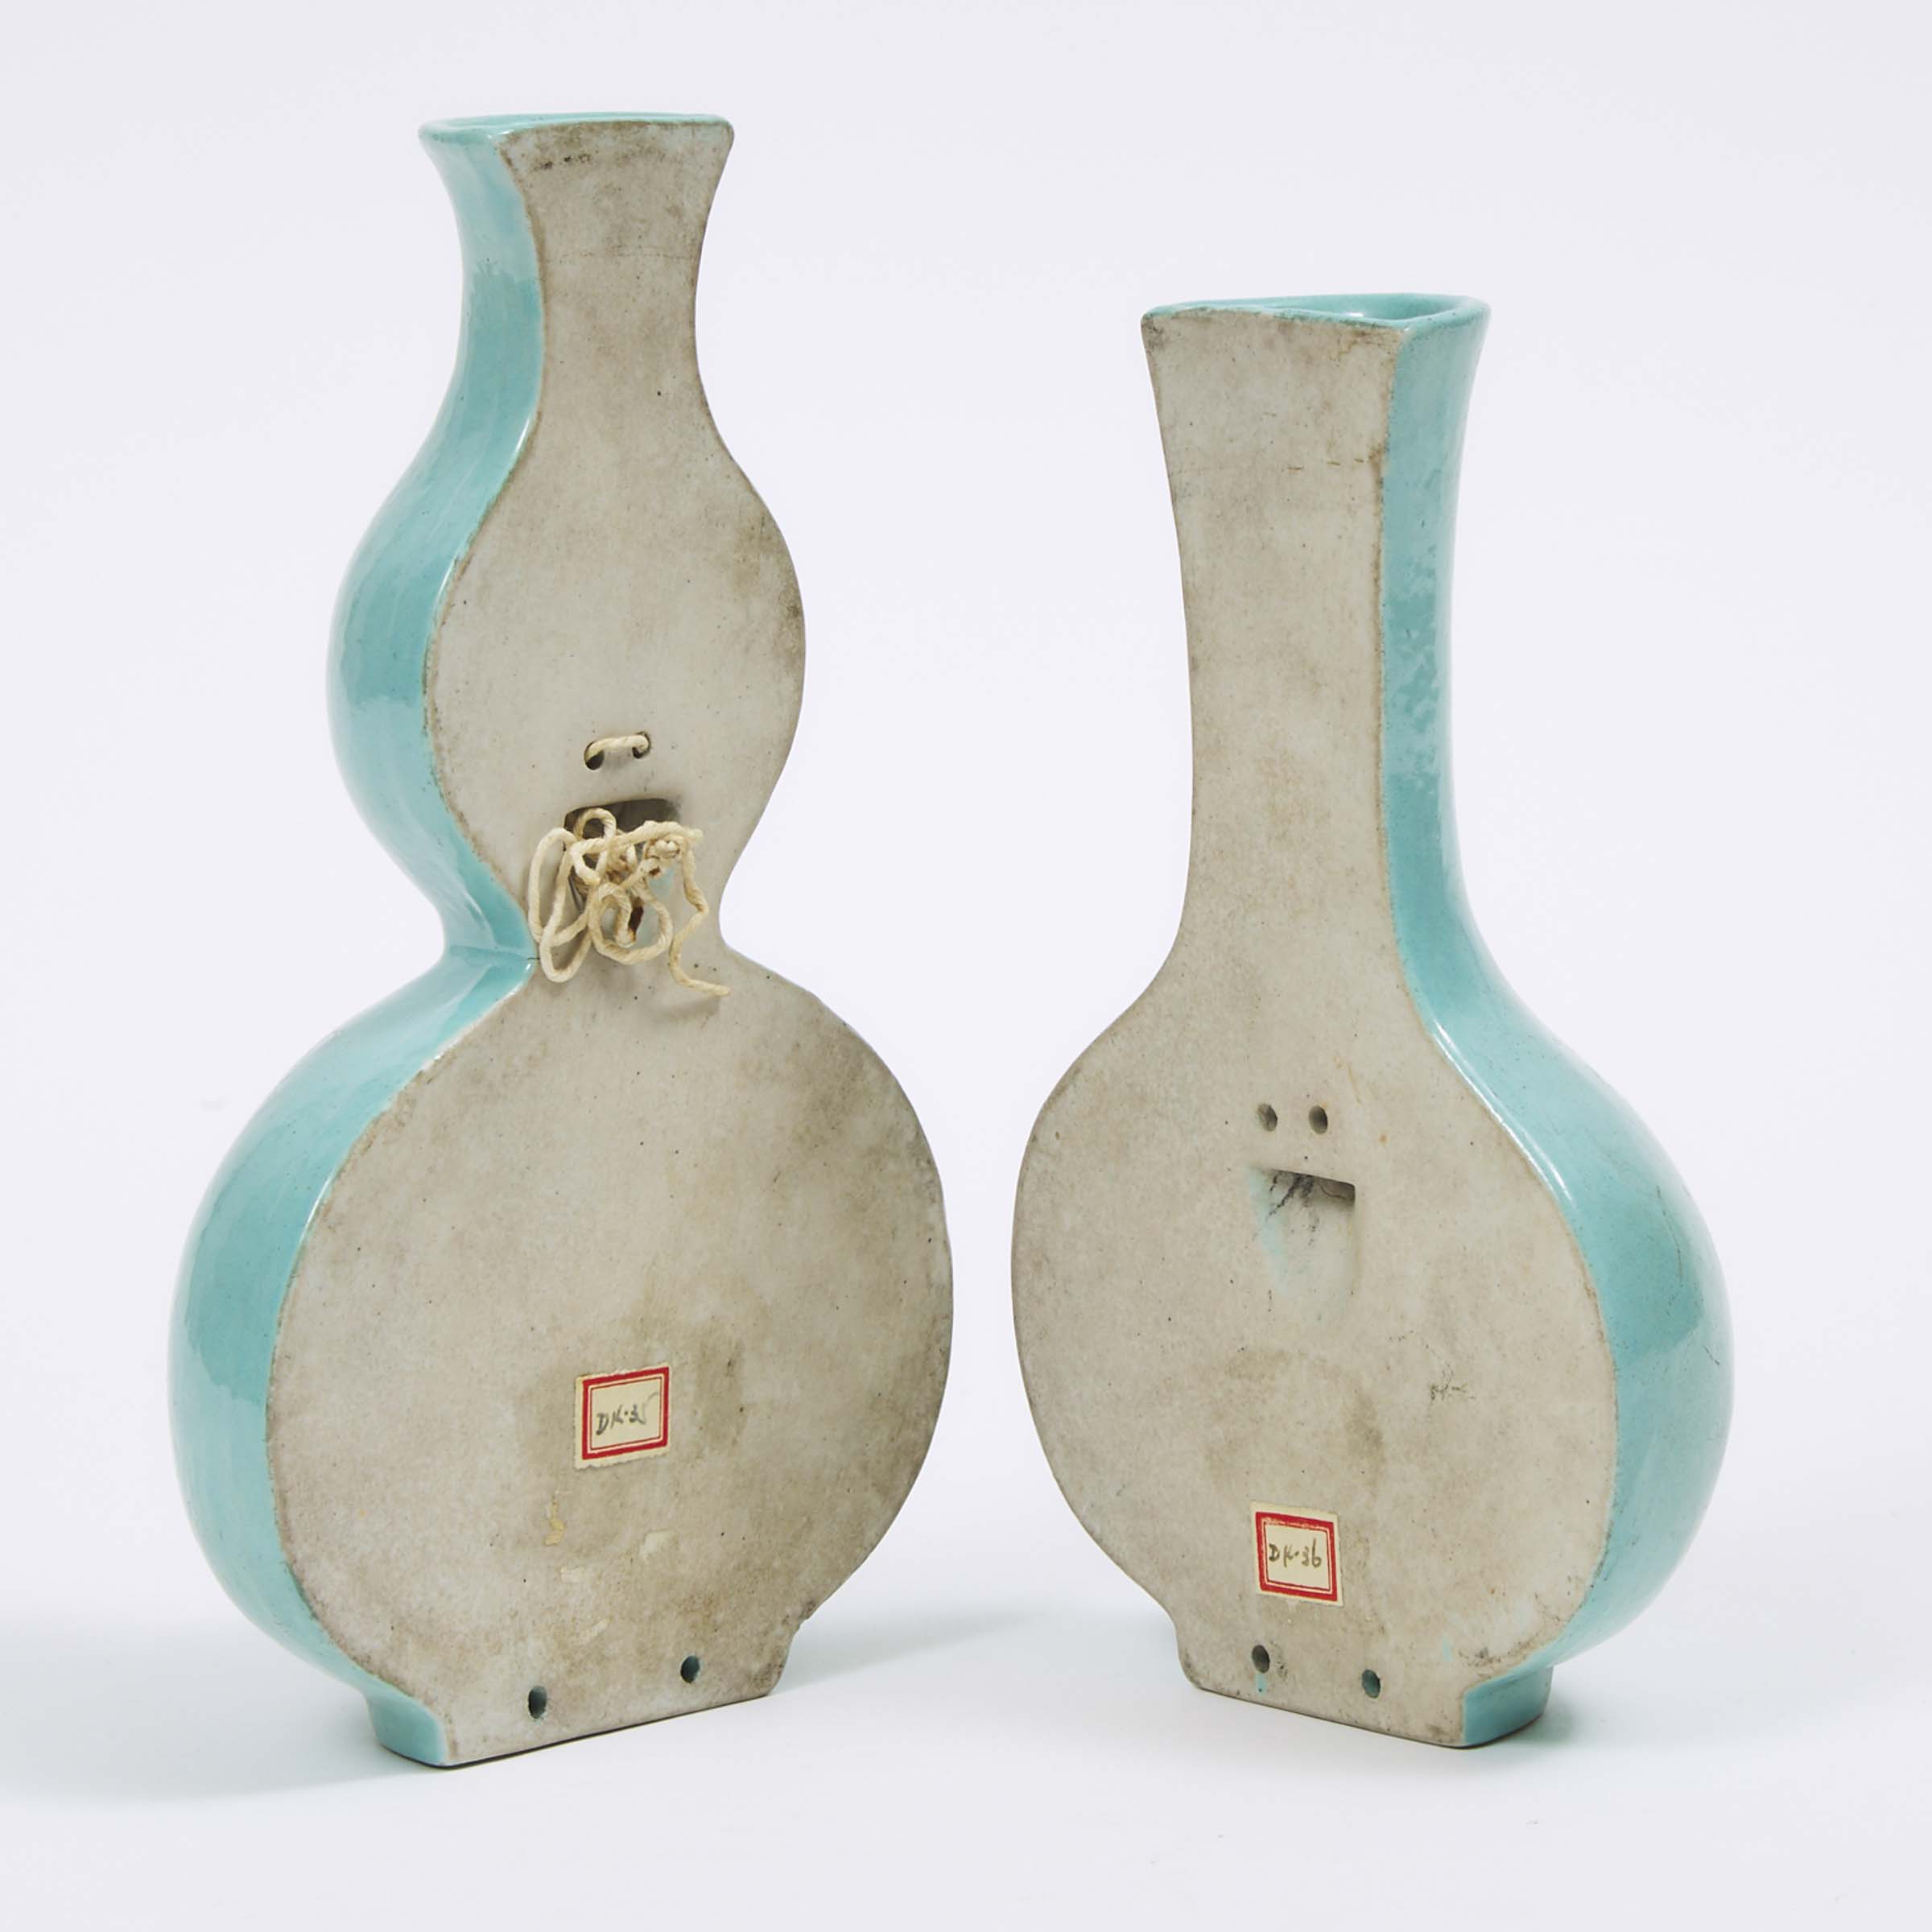 Two Turquoise-Glazed Wall Vases, 19th/20th Century